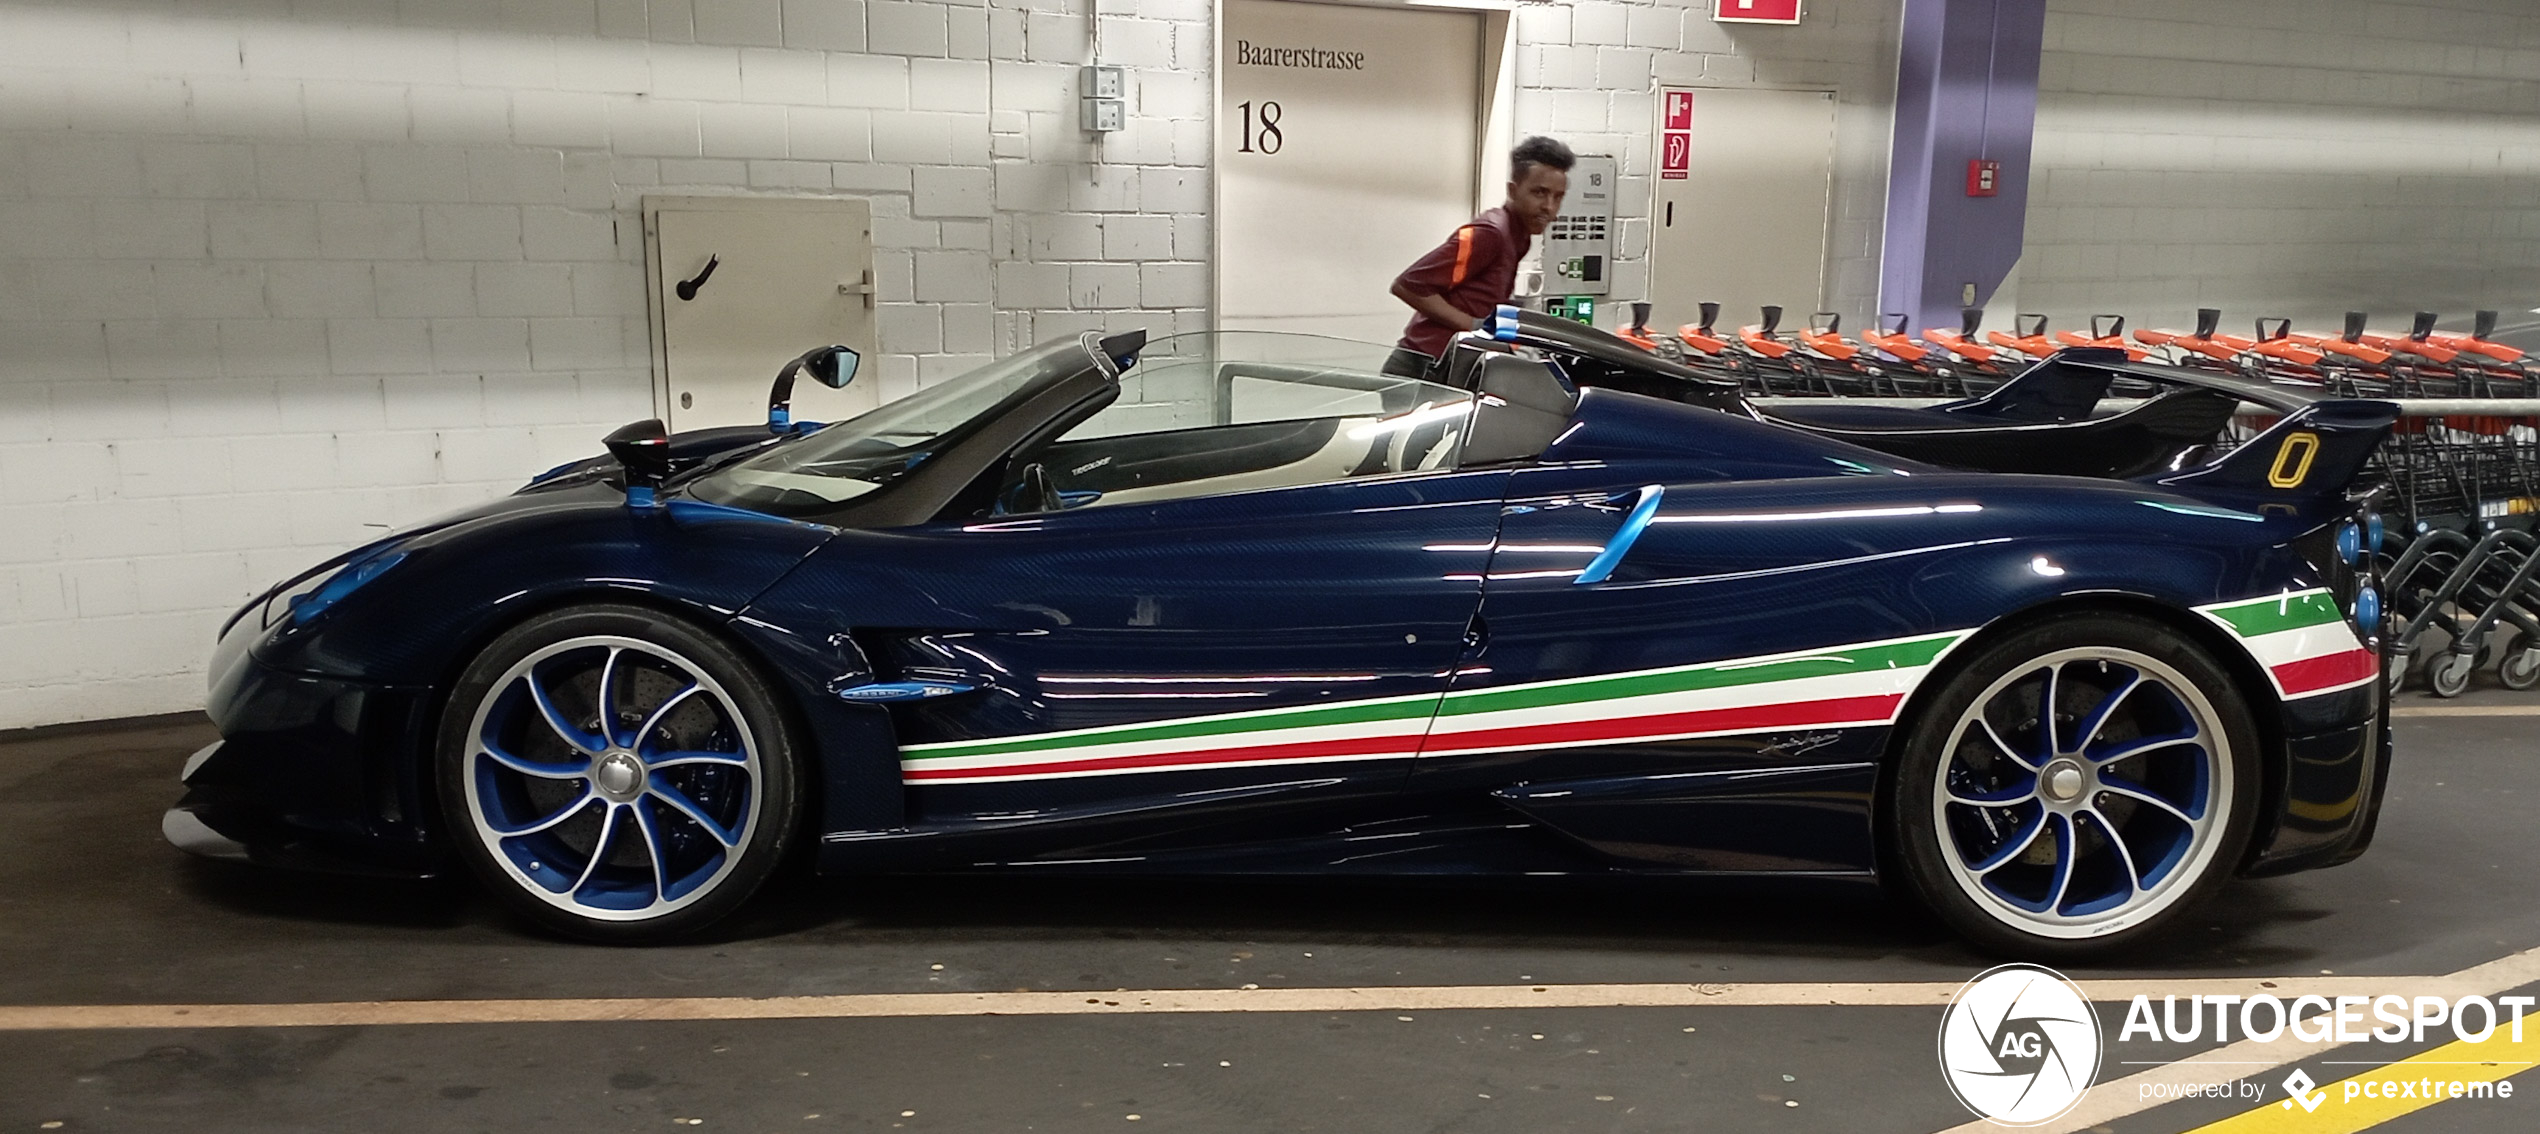 You can do groceries with the Pagani Huayra Tricolore